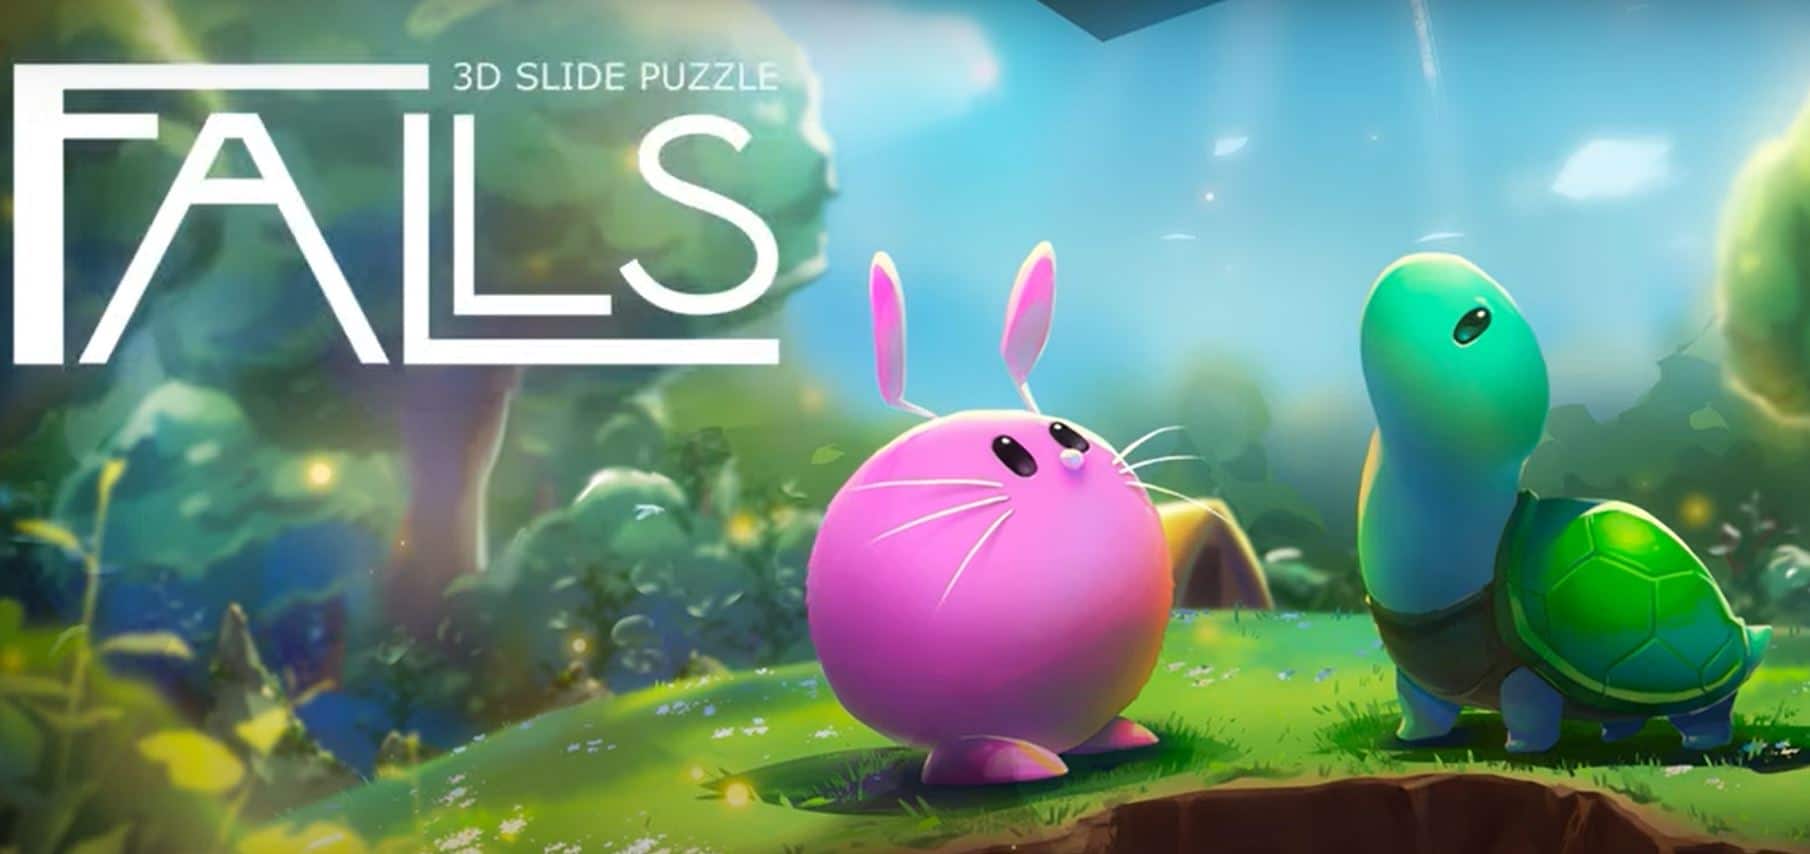 Falls - 3D Slide Puzzle: Now available on iOS and Android thumbnail